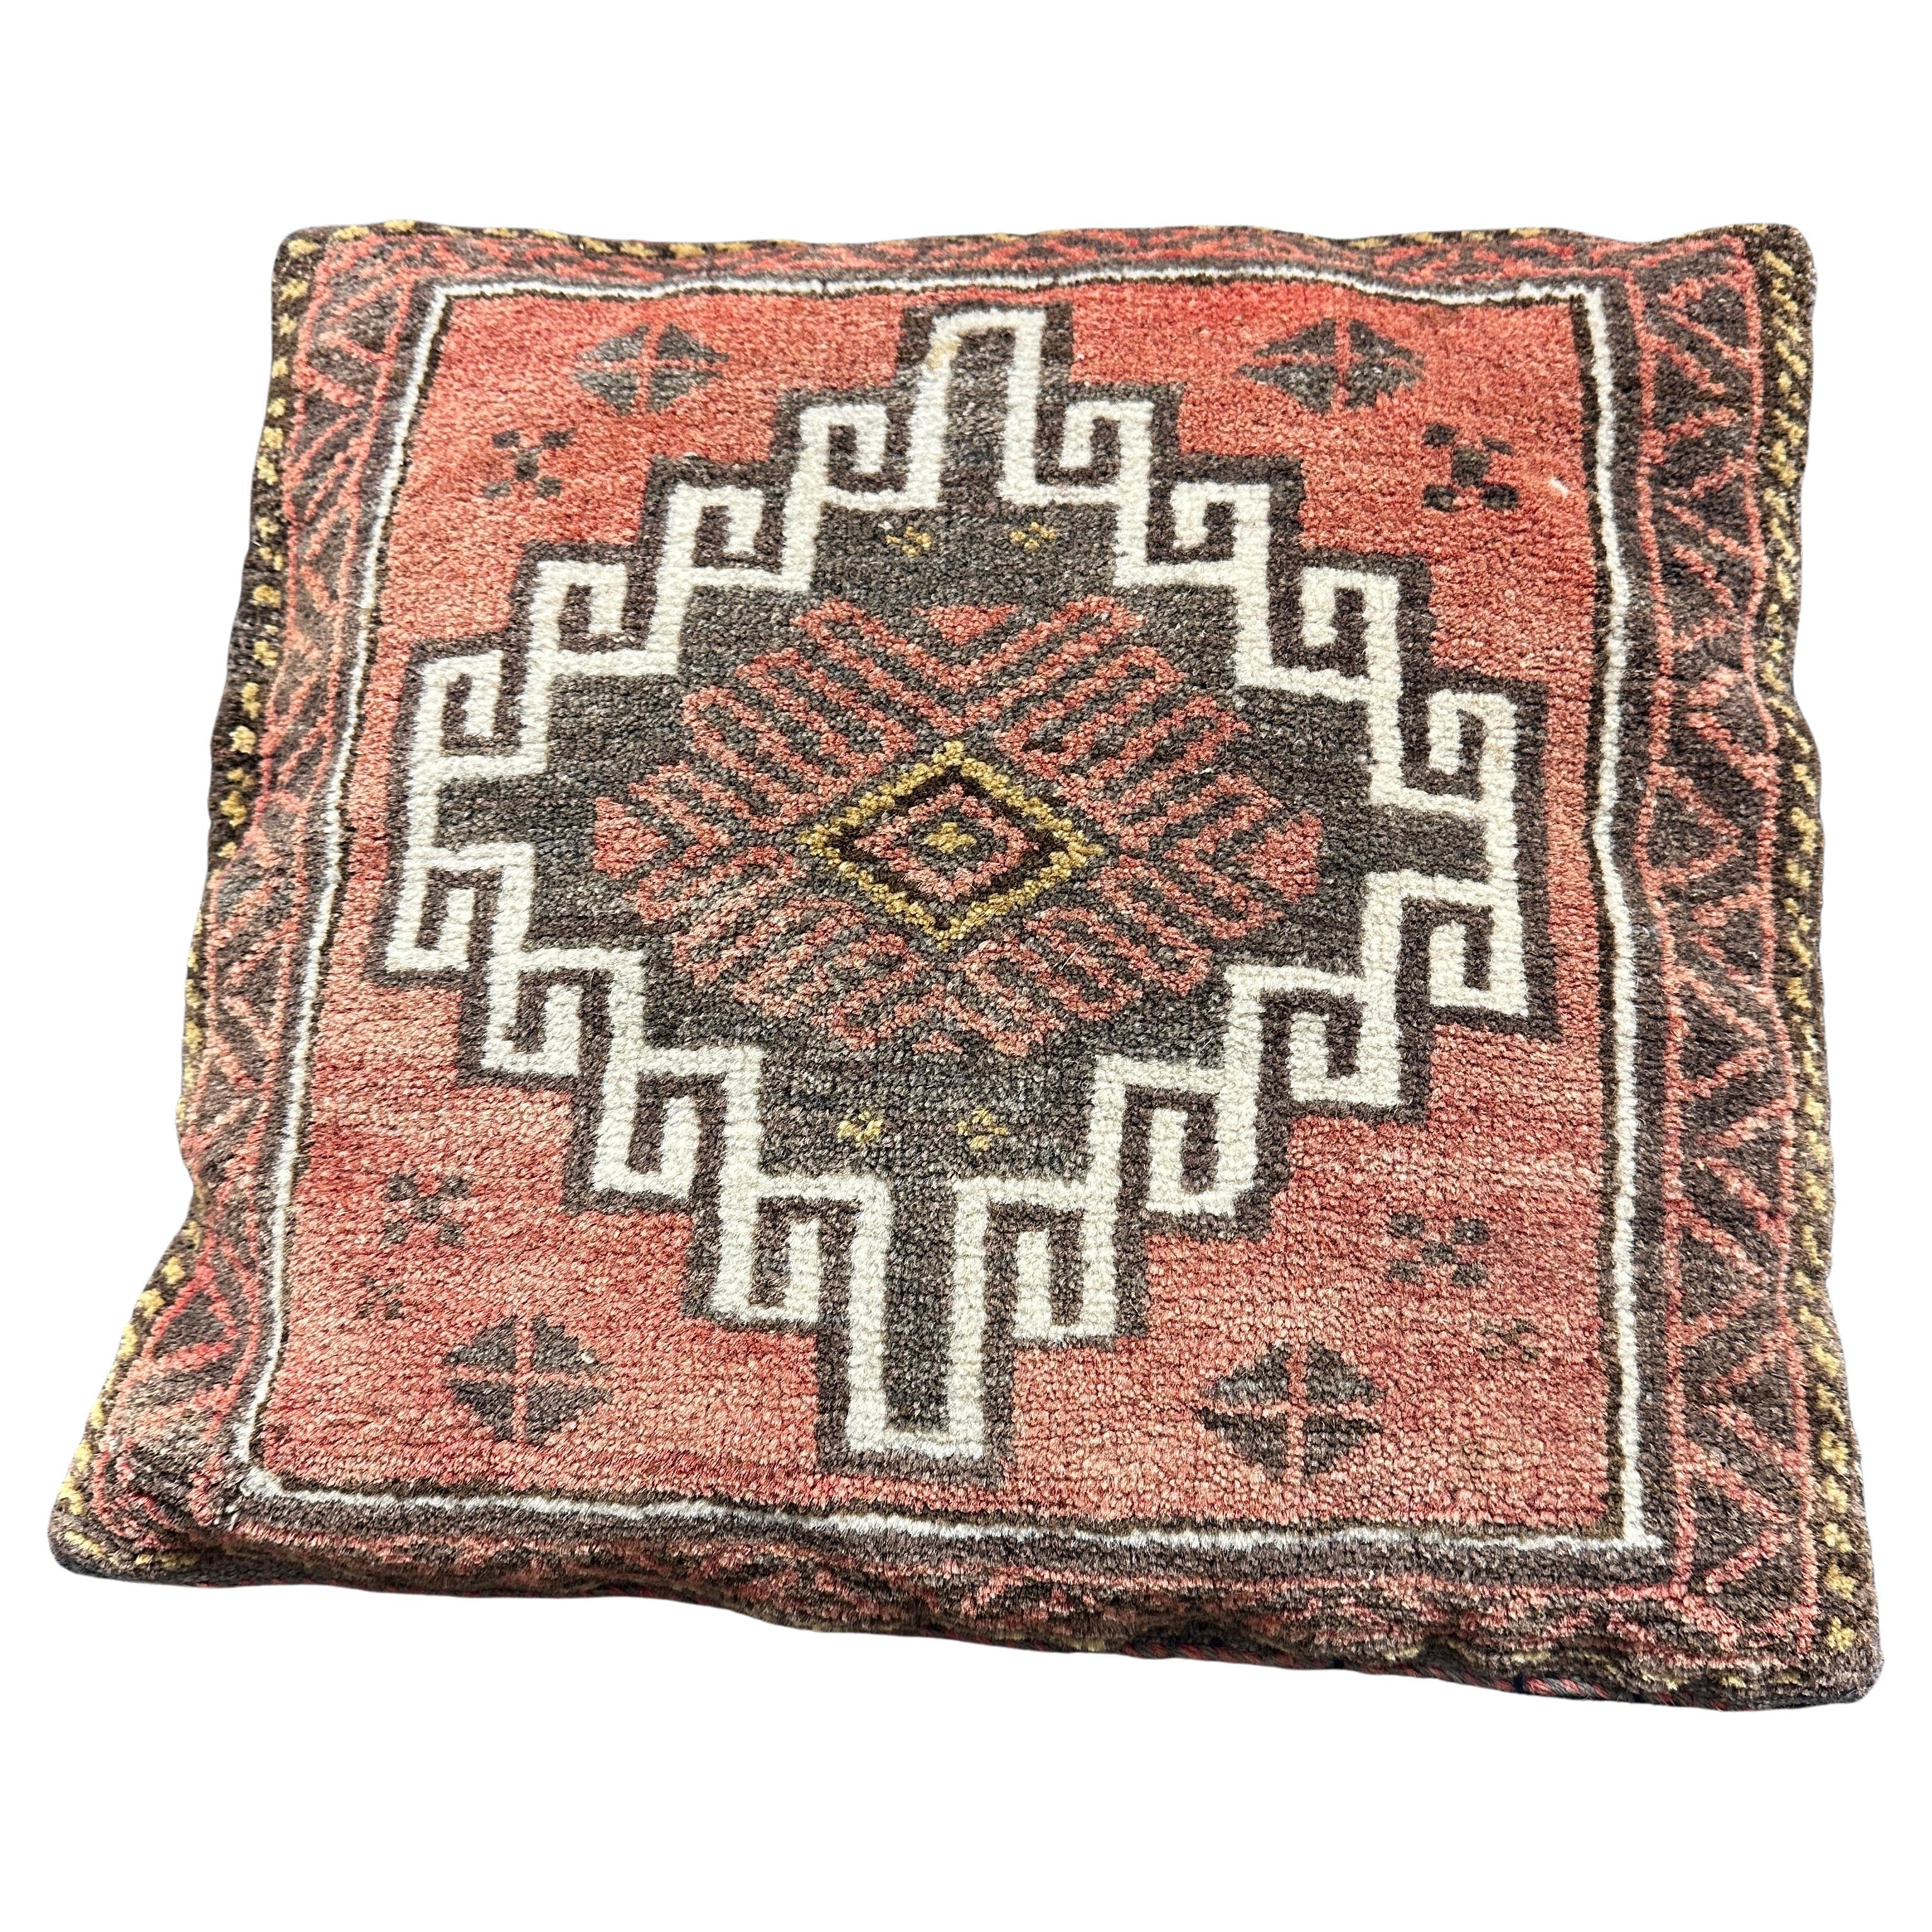 Beautiful Vintage Gypsy Oriental Embroidery Pillow Cushion, 1950s